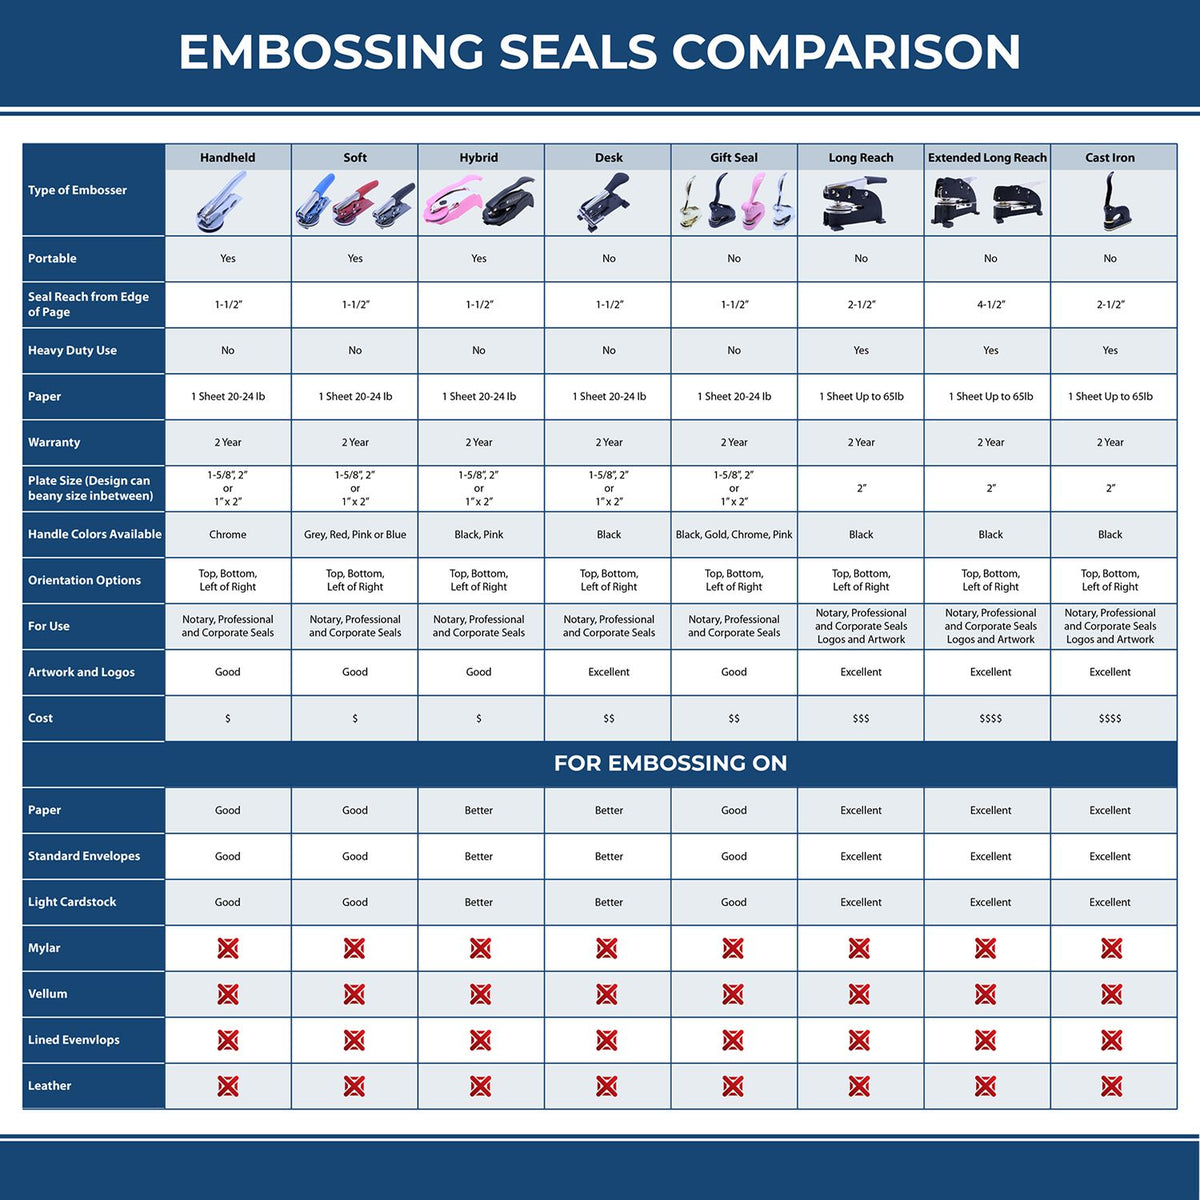 A comparison chart for the different types of mount models available for the State of Texas Extended Long Reach Geologist Seal